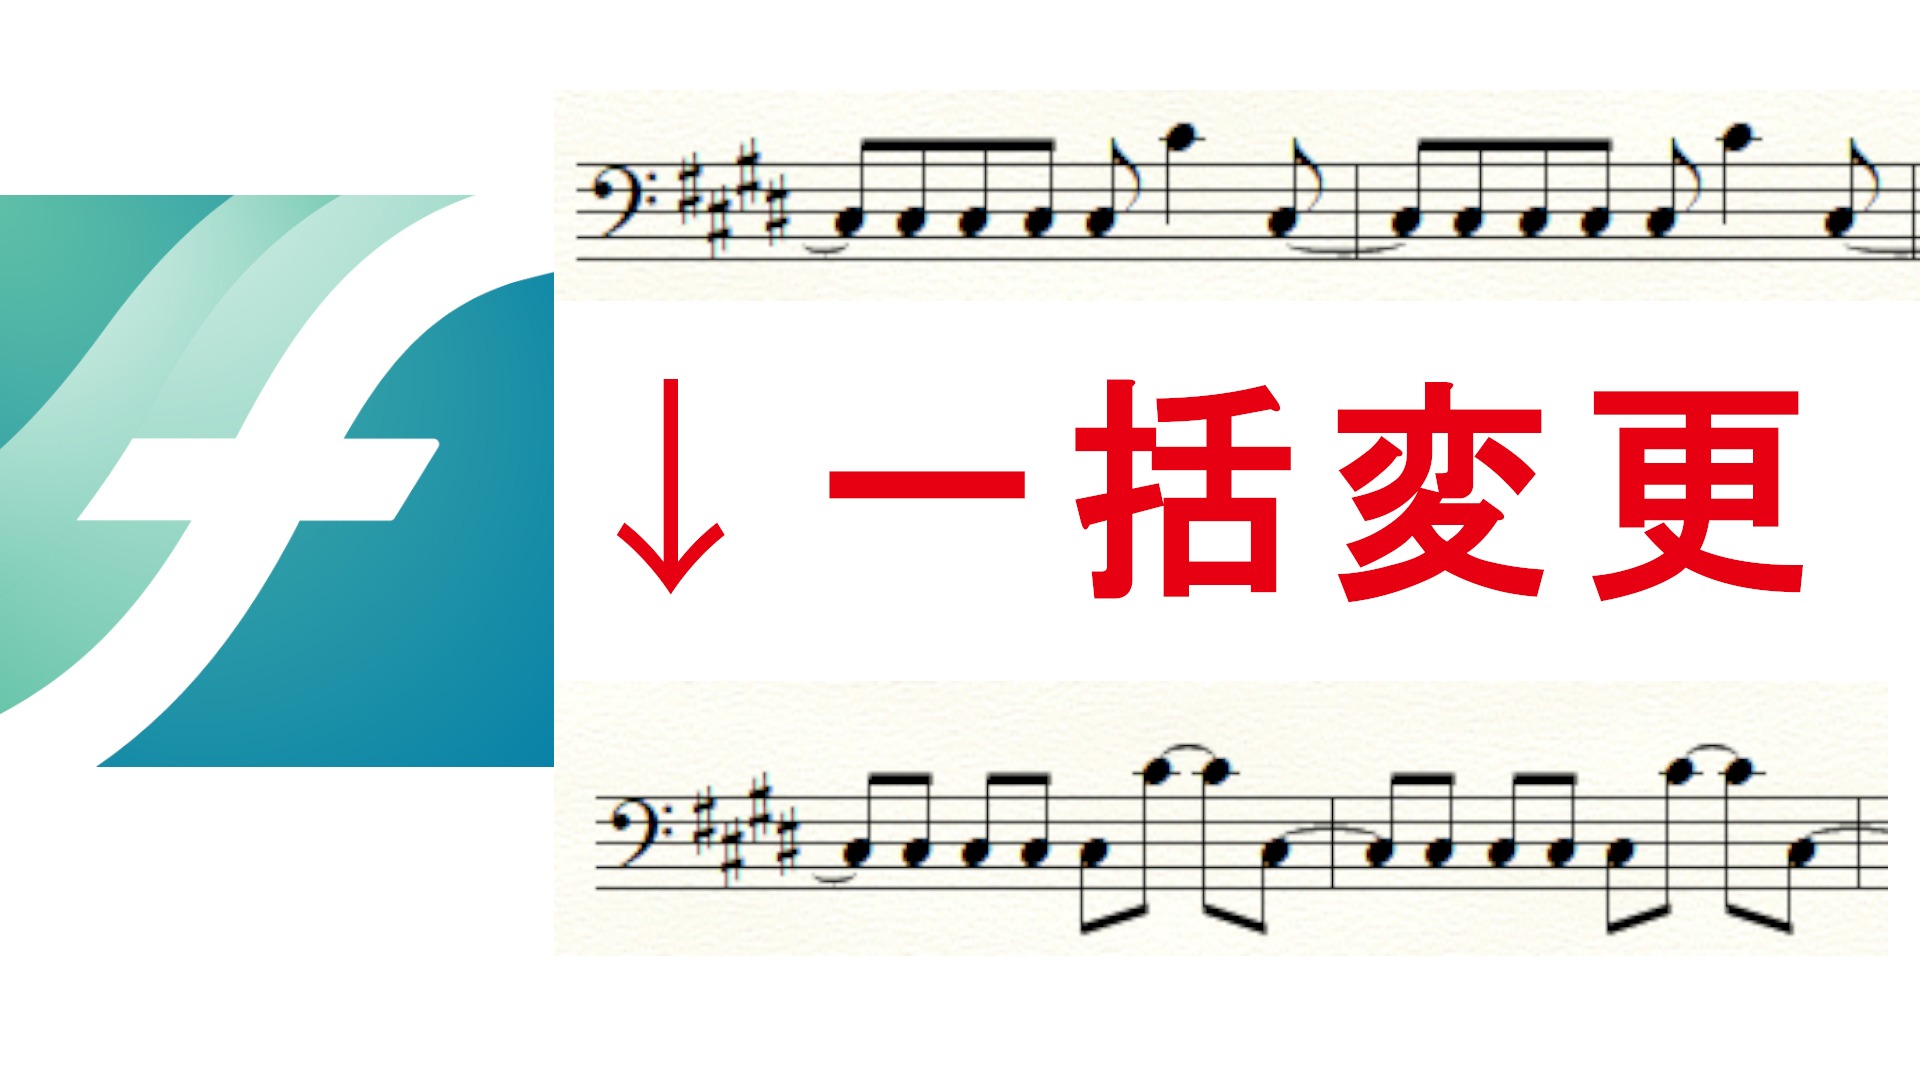 Finale時短tips 裏拍4分音符 を一括で タイあり8分音符 に変更する方法 Khufrudamo Notes Official Web Site